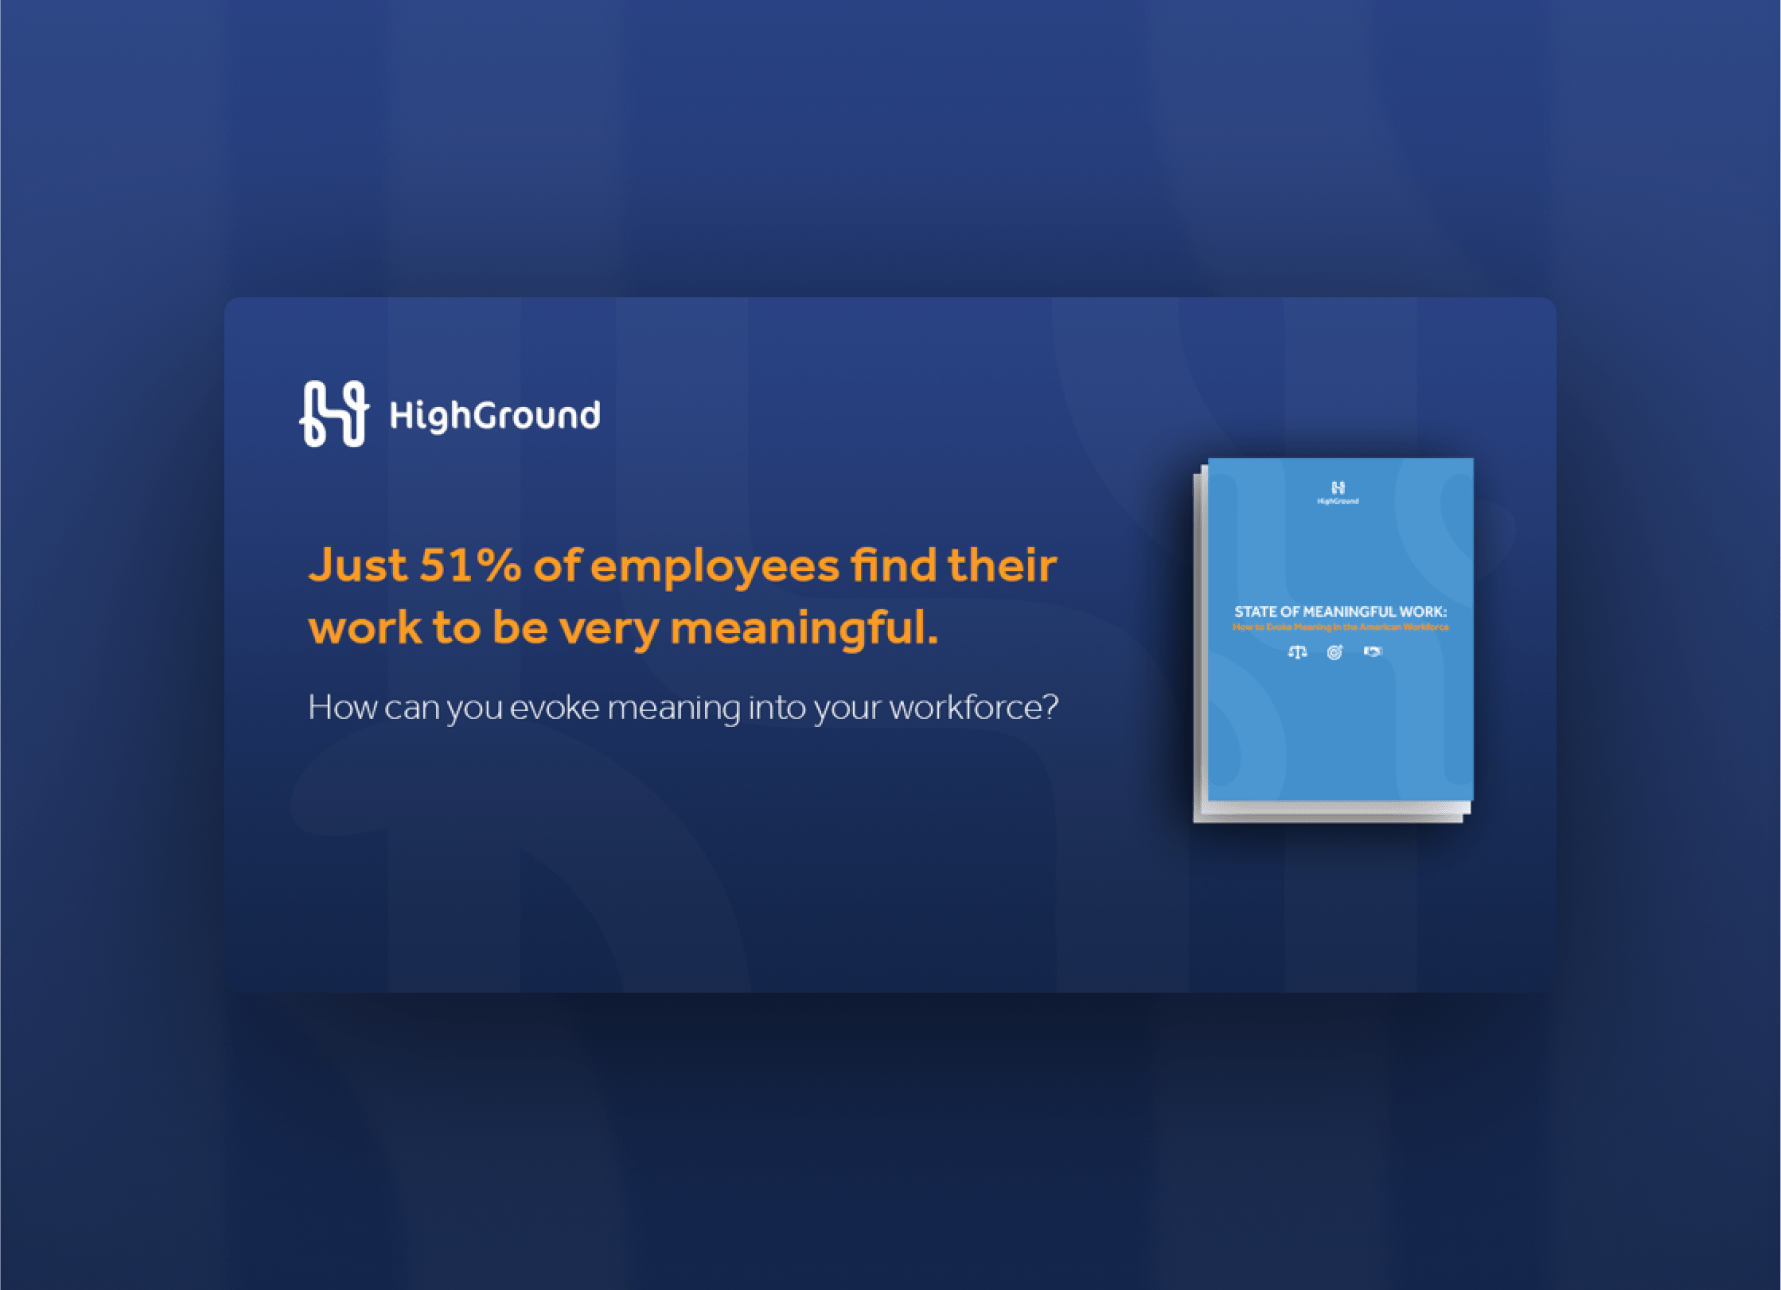 HighGround report cover featuring the statistic "Just 51% of employees find their work to be very meaningful."